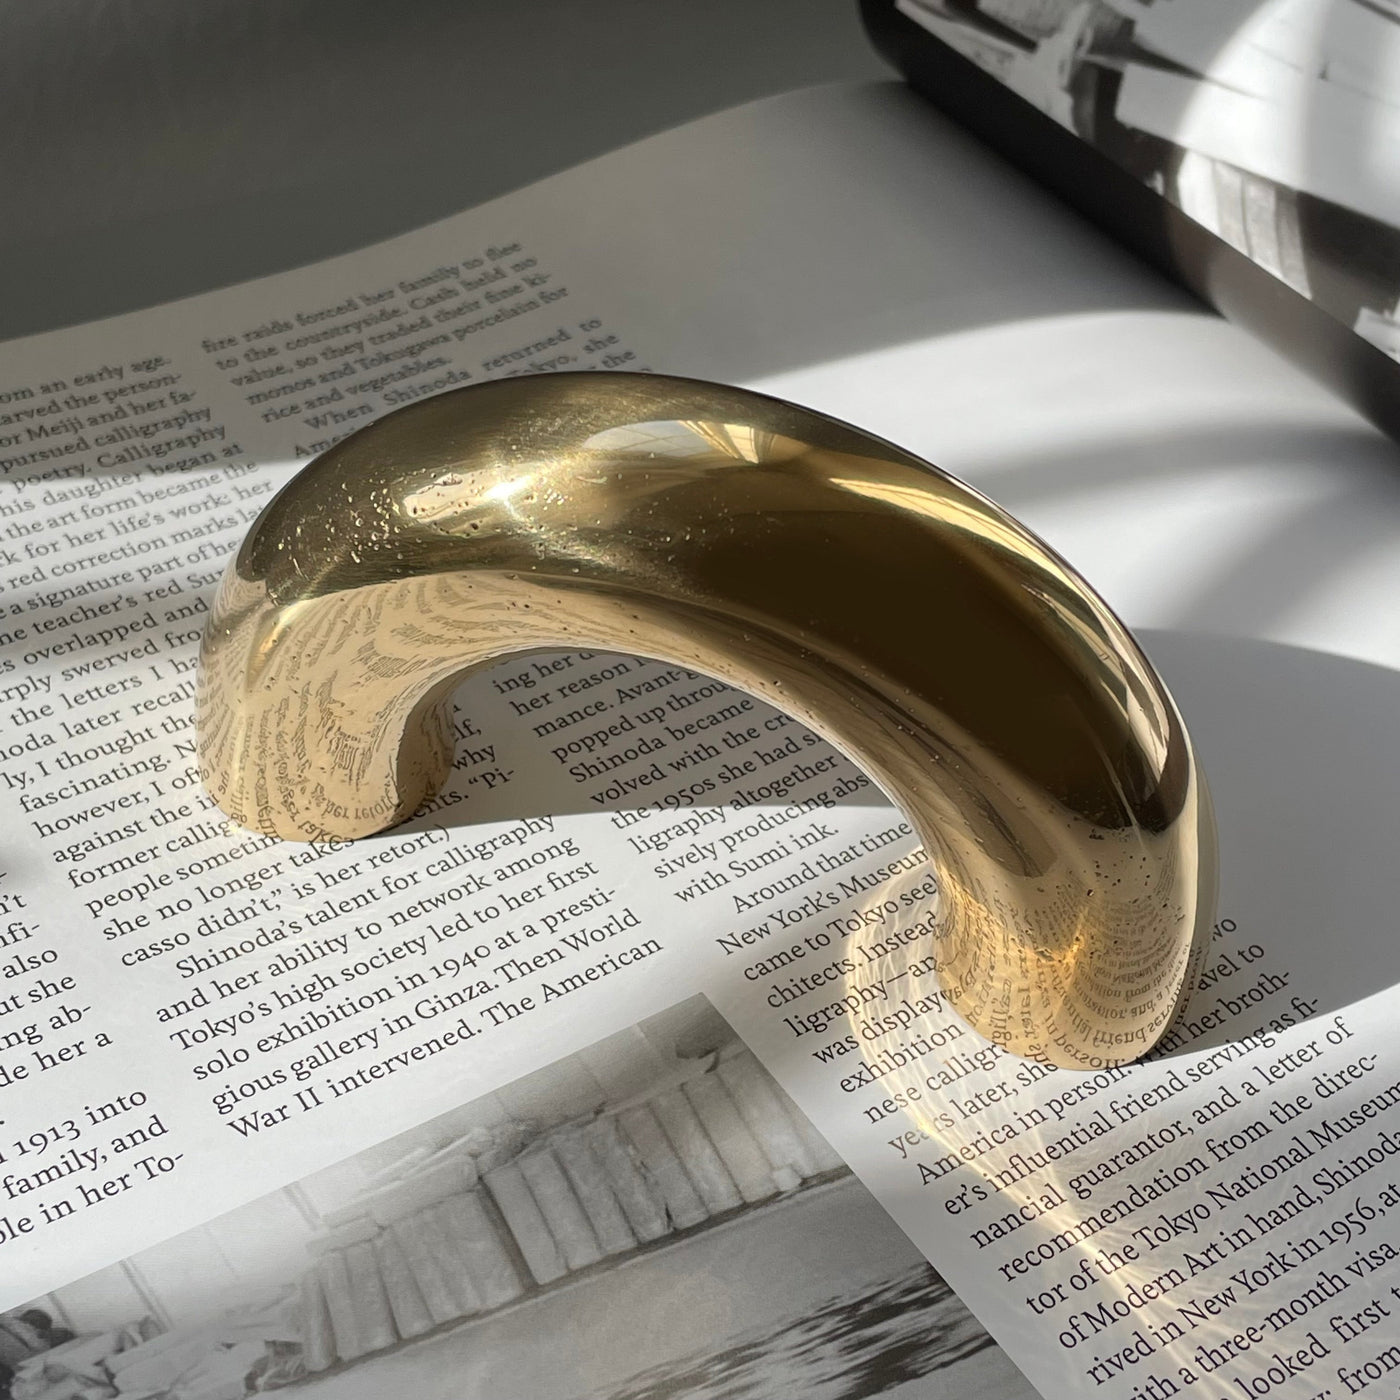 solid cast natural and white brass and bronze curved cabinet hardware handle by Maha Alavi